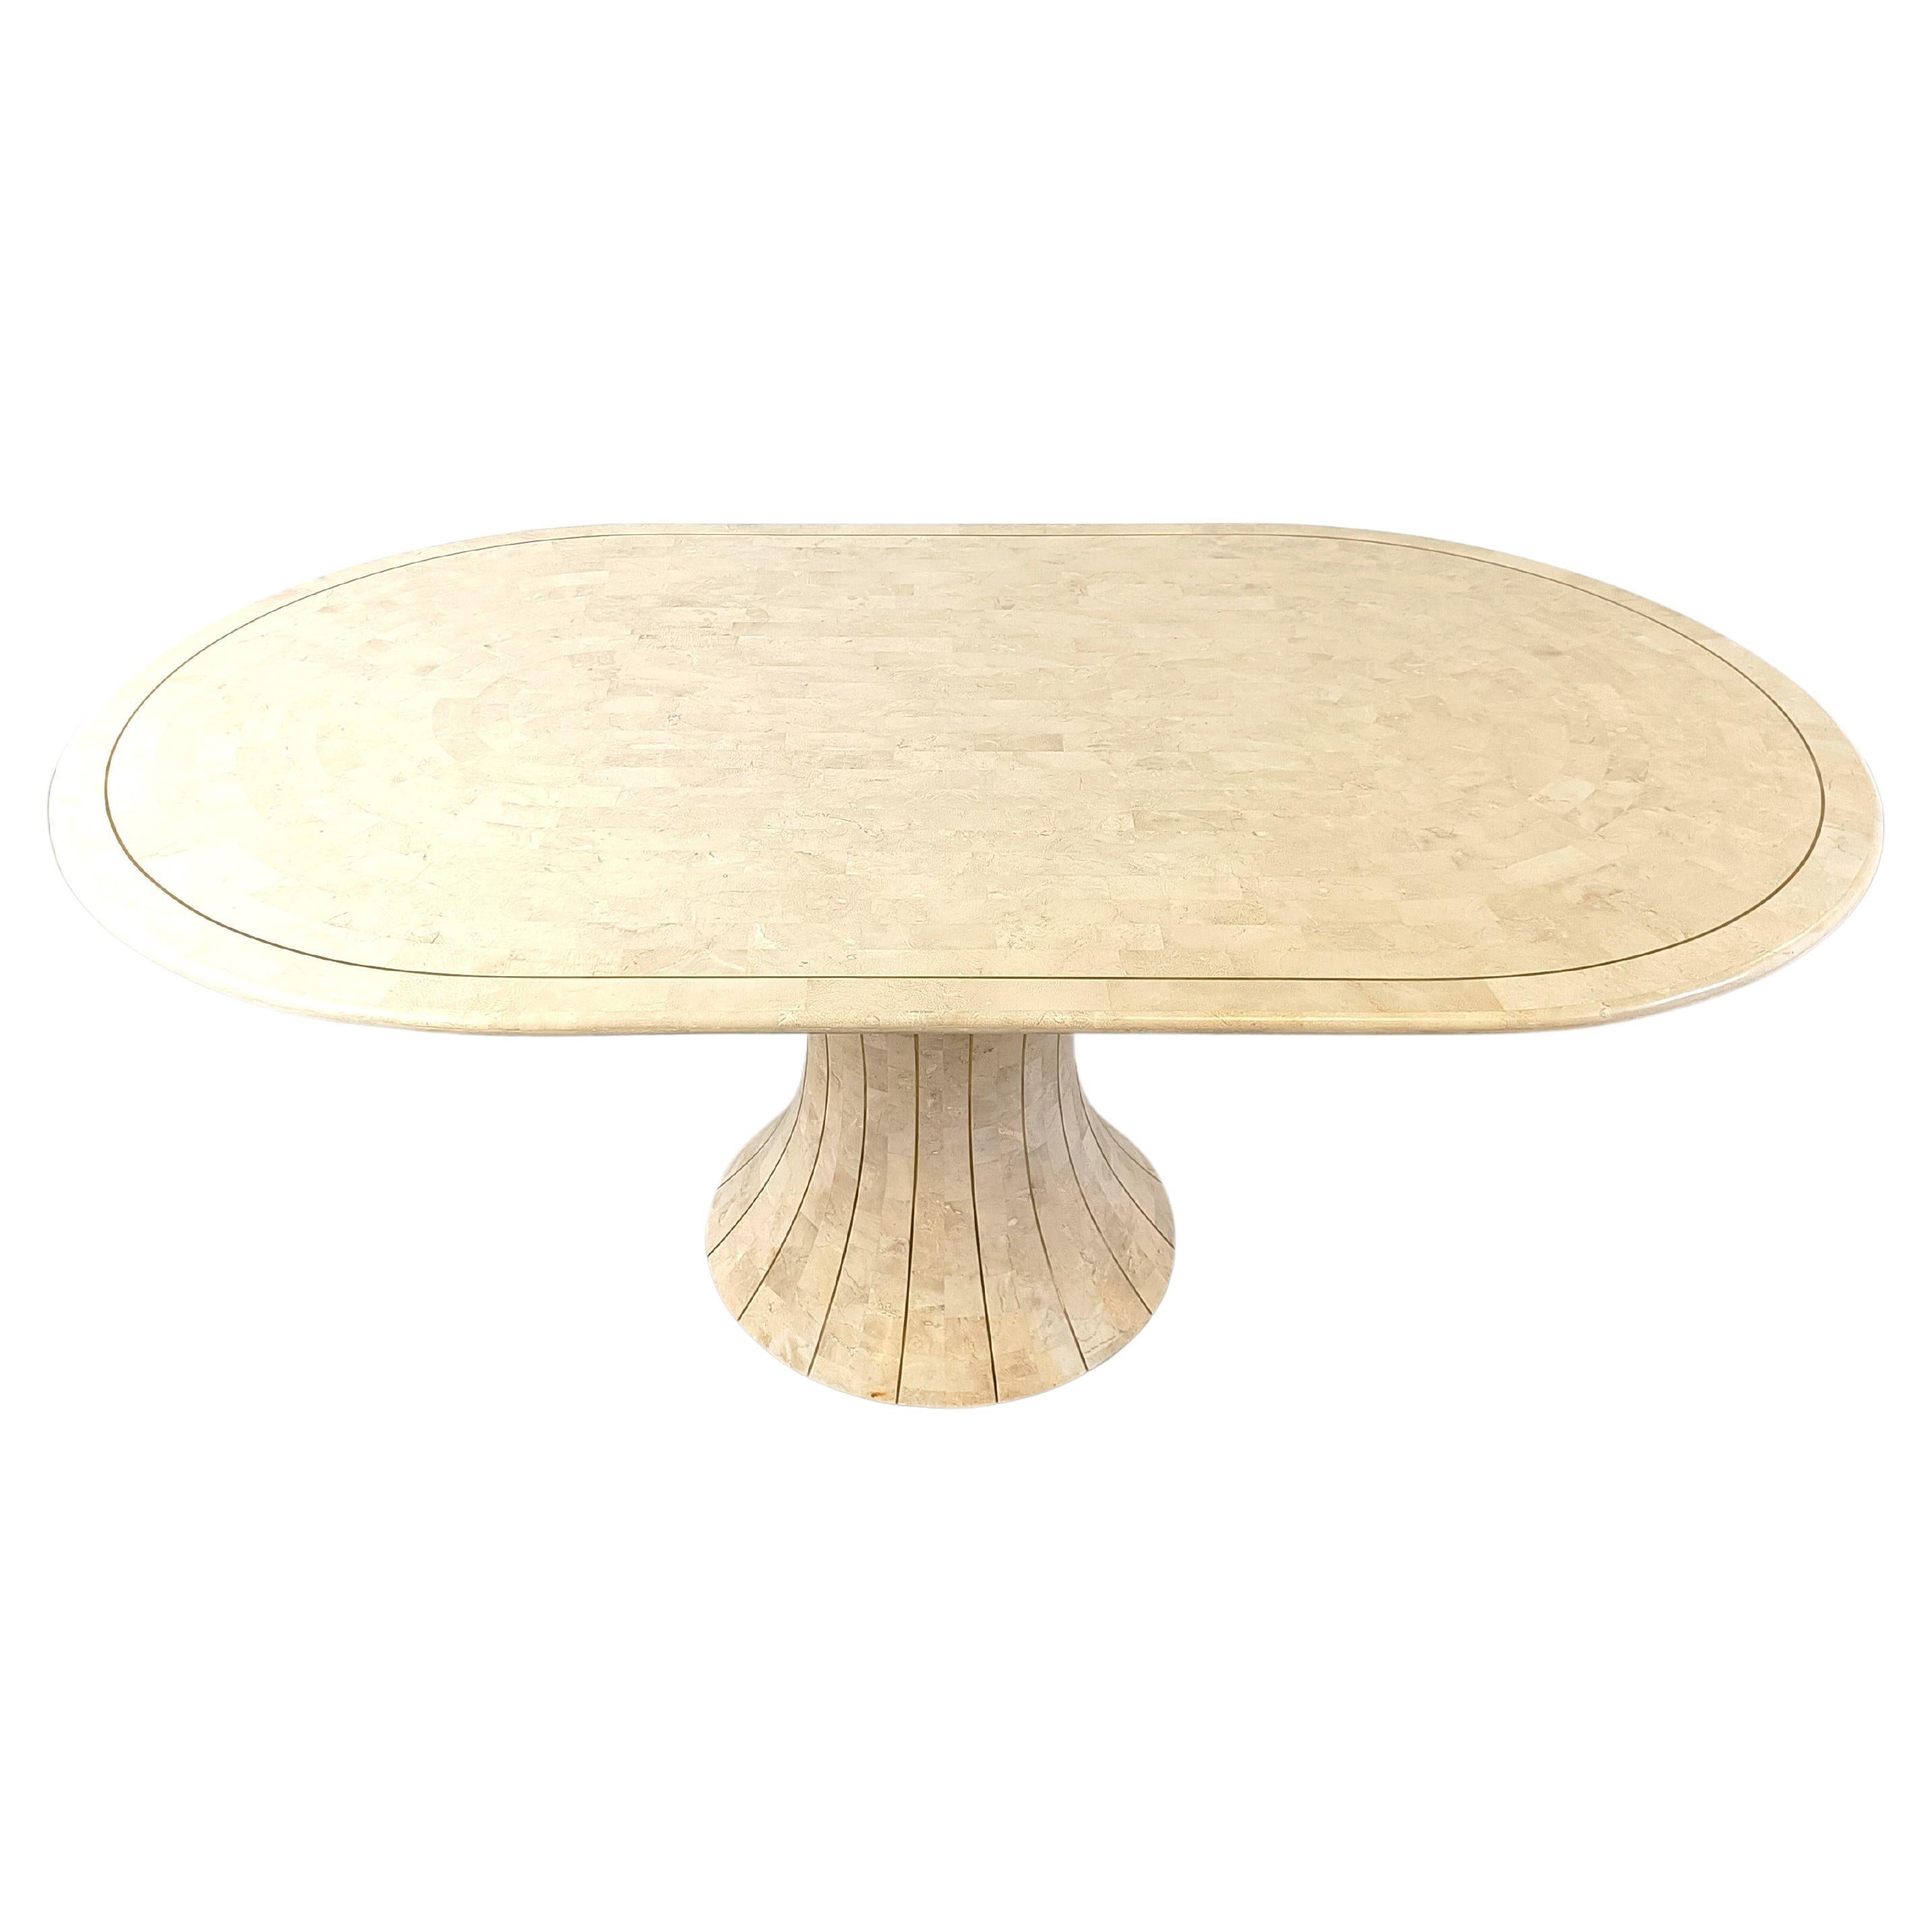 Oval tesselated stone dining table by Maithland smith, 1970s 